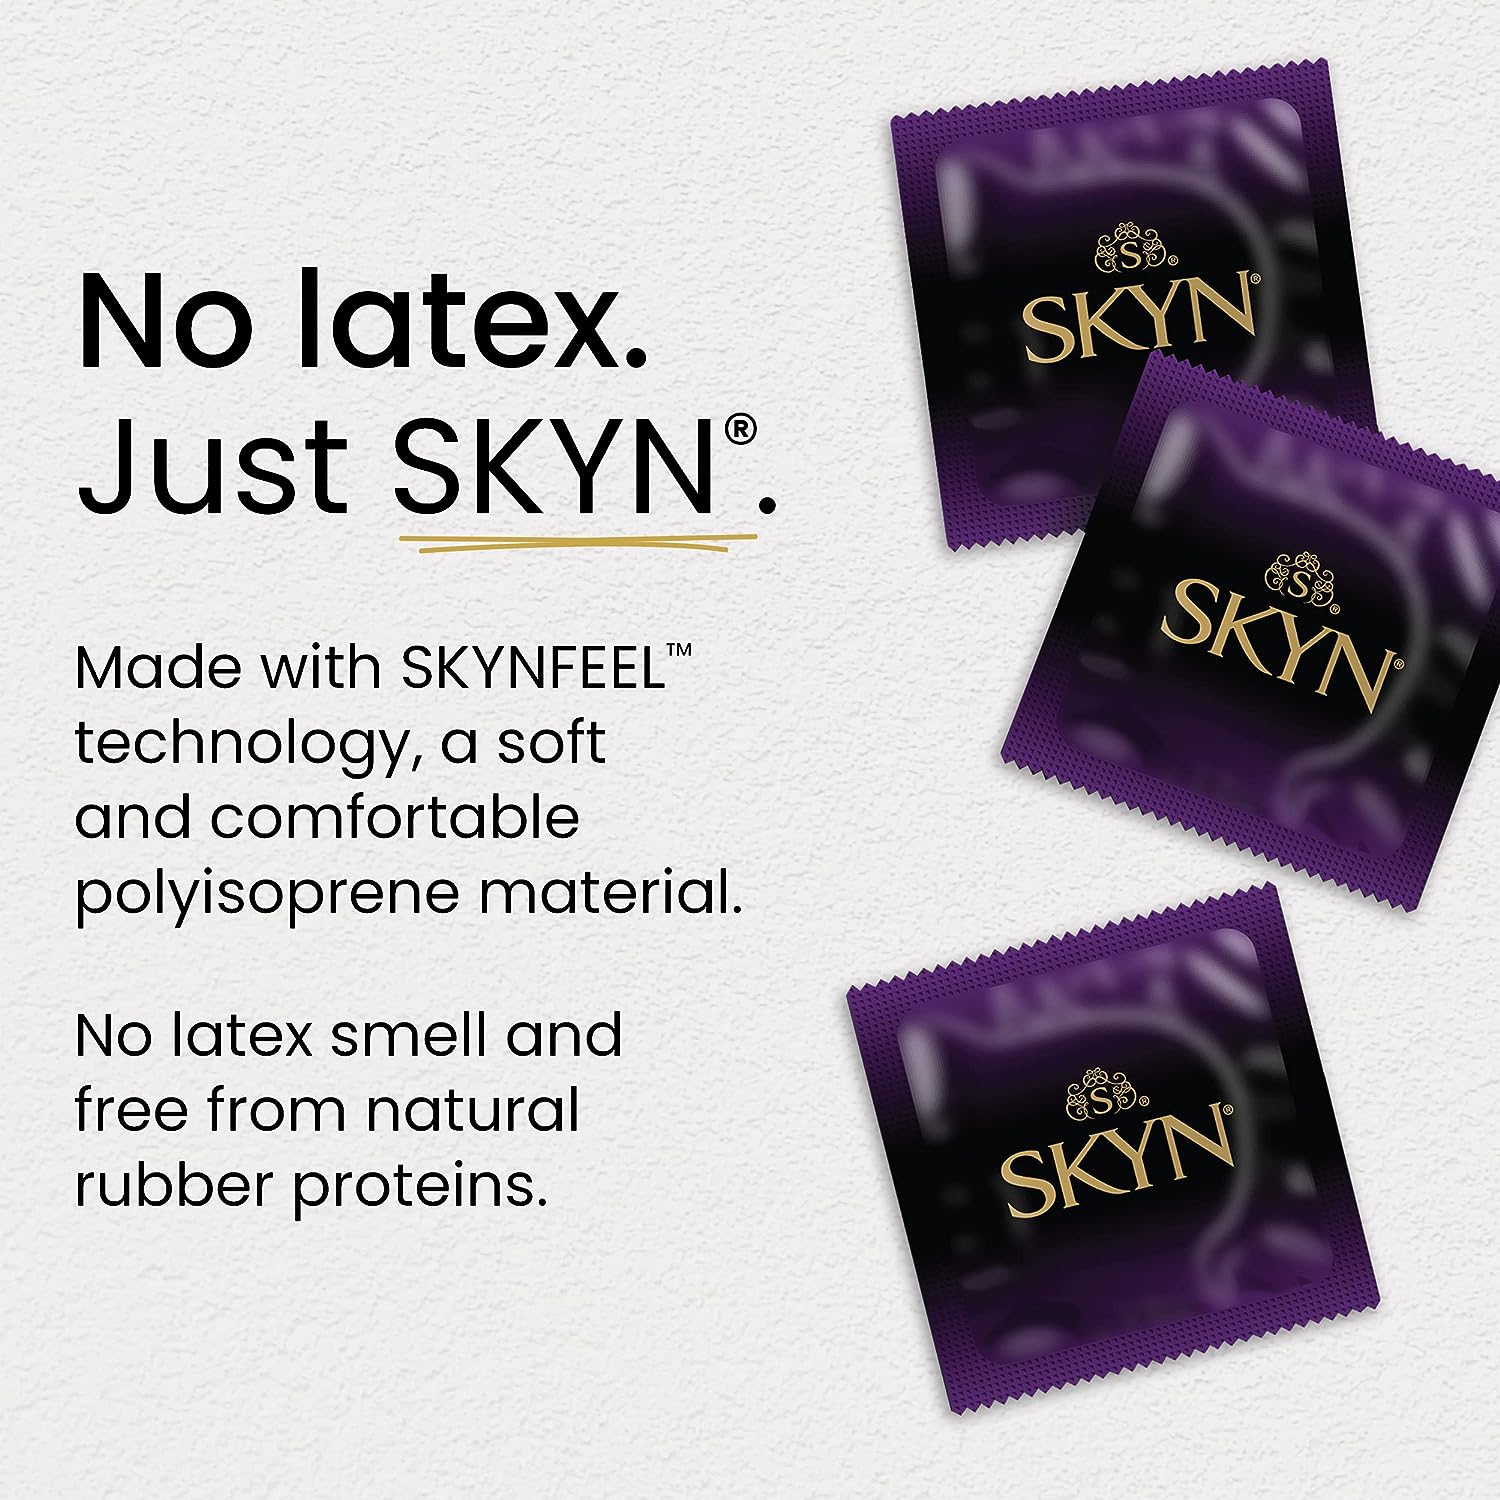 SKYN Elite – 36 Count – Ultra-Thin, Lubricated Latex-Free Condoms - Sex Shop Miami